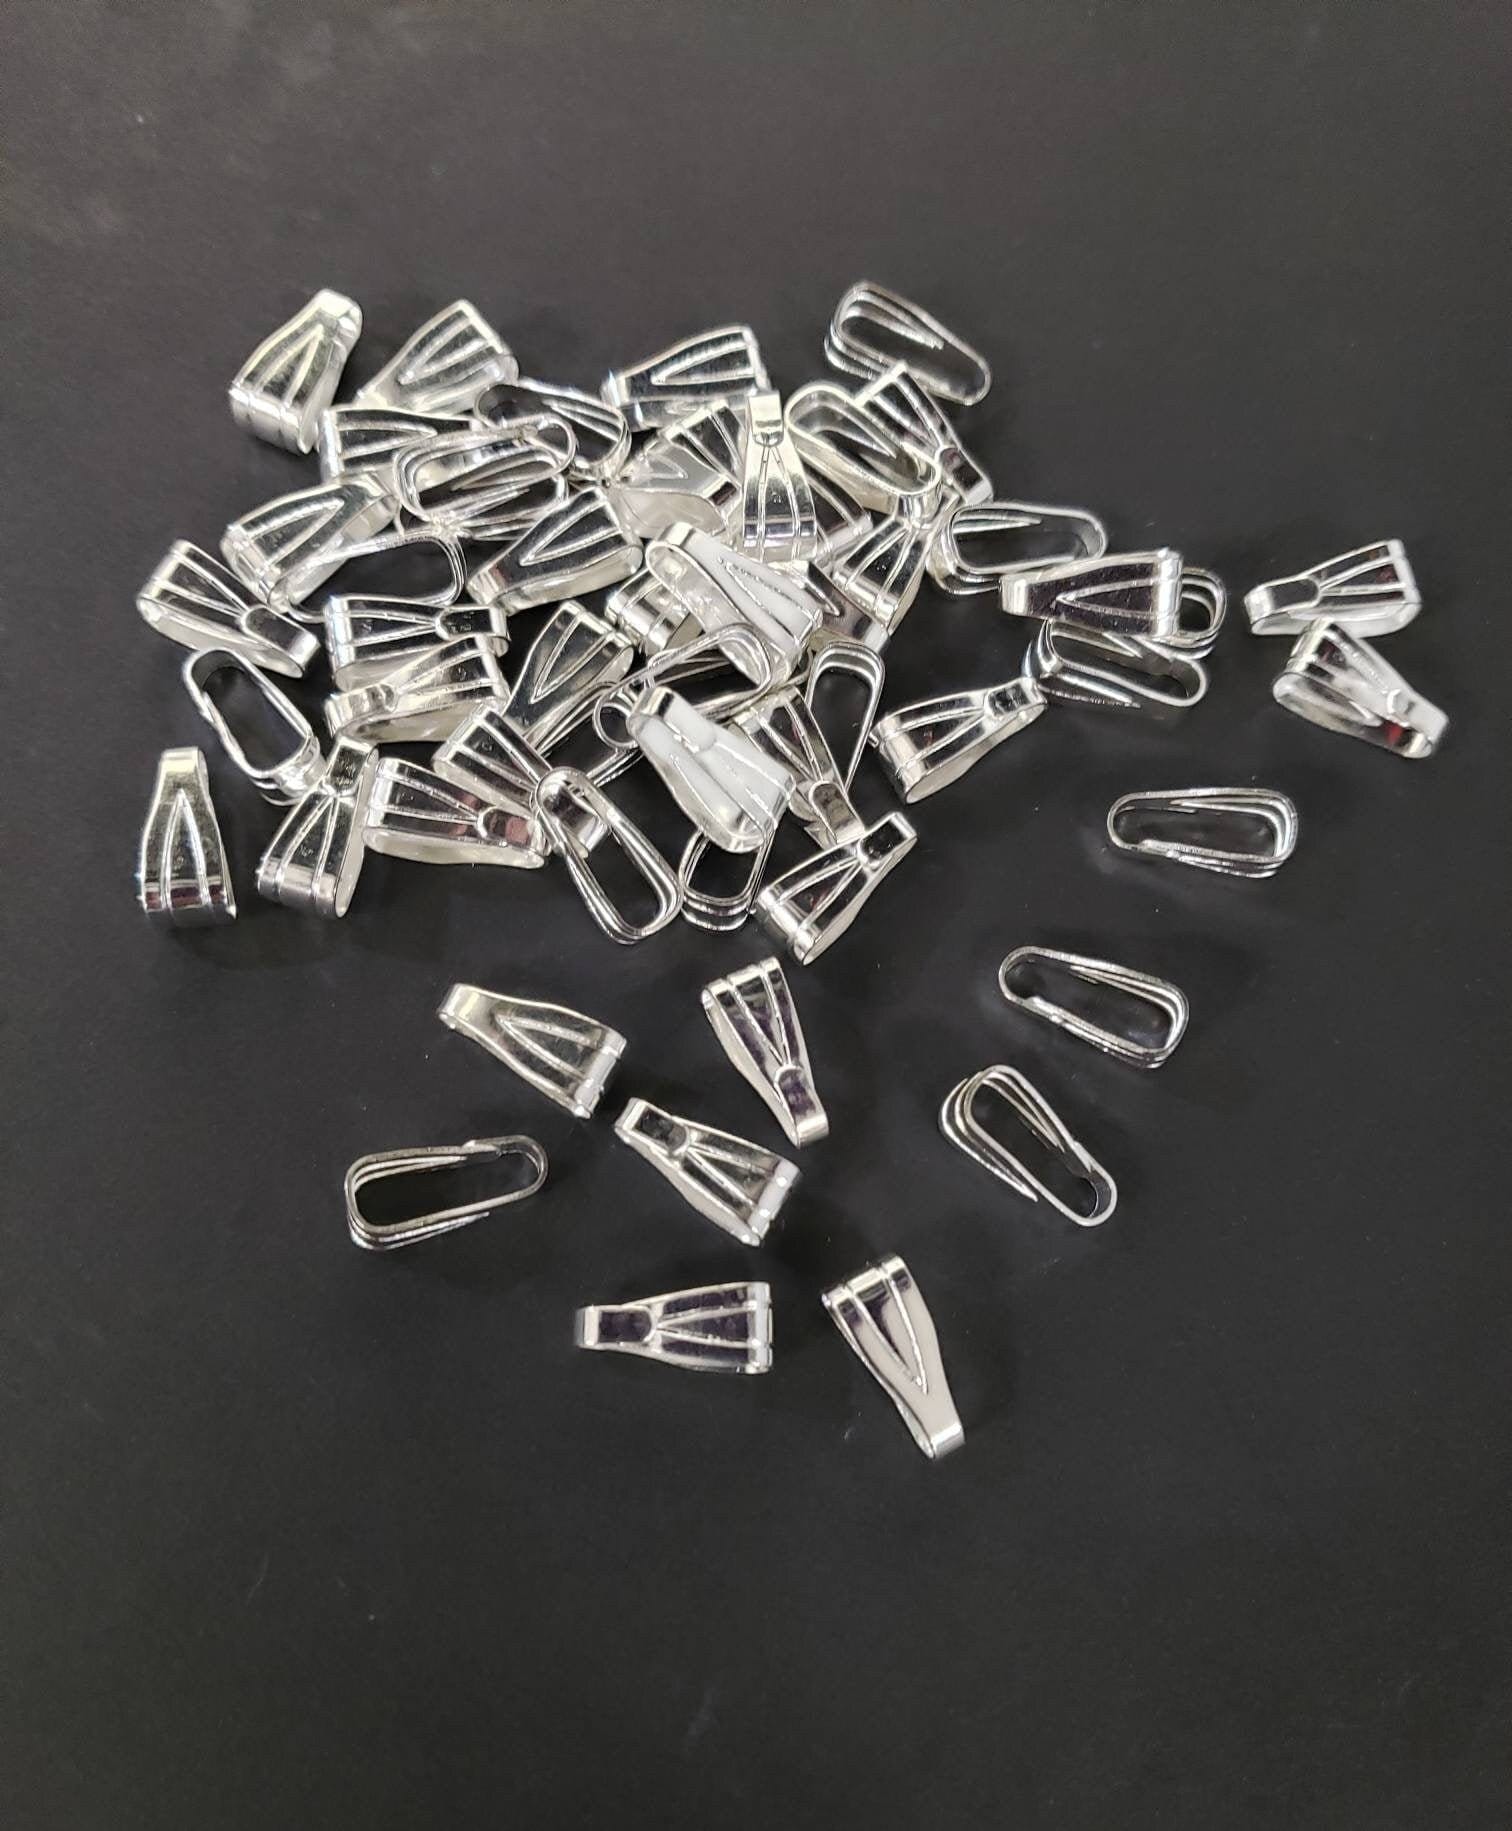 10pcs silver shiny bail snap on ,4×10mm long , silver plated pendant holder jewelry supplies. Price for bails only